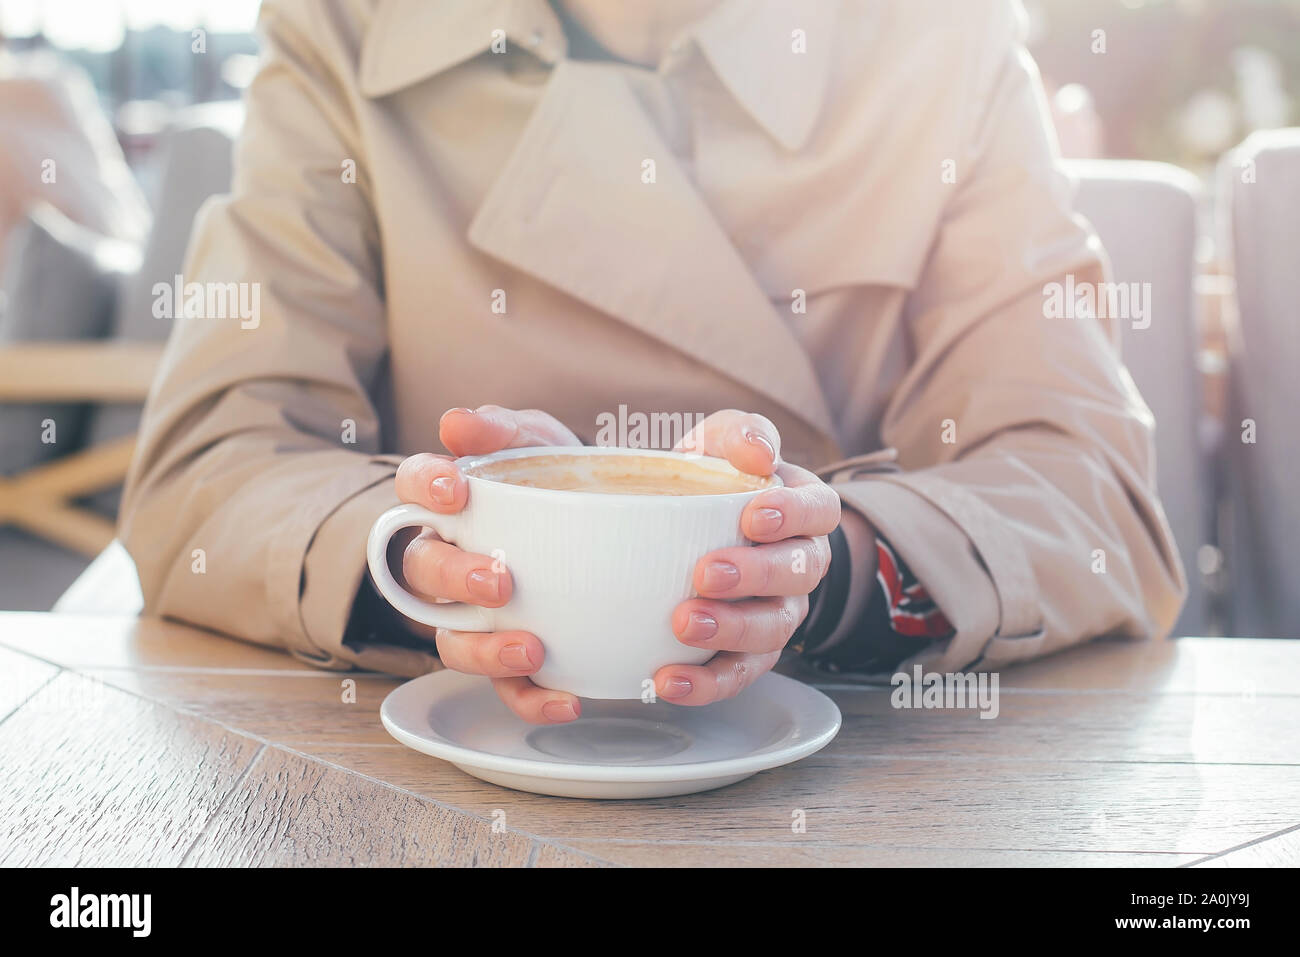 Big white coffee cup in woman's hands with pastel manicure while sitting in cafe. Stock Photo